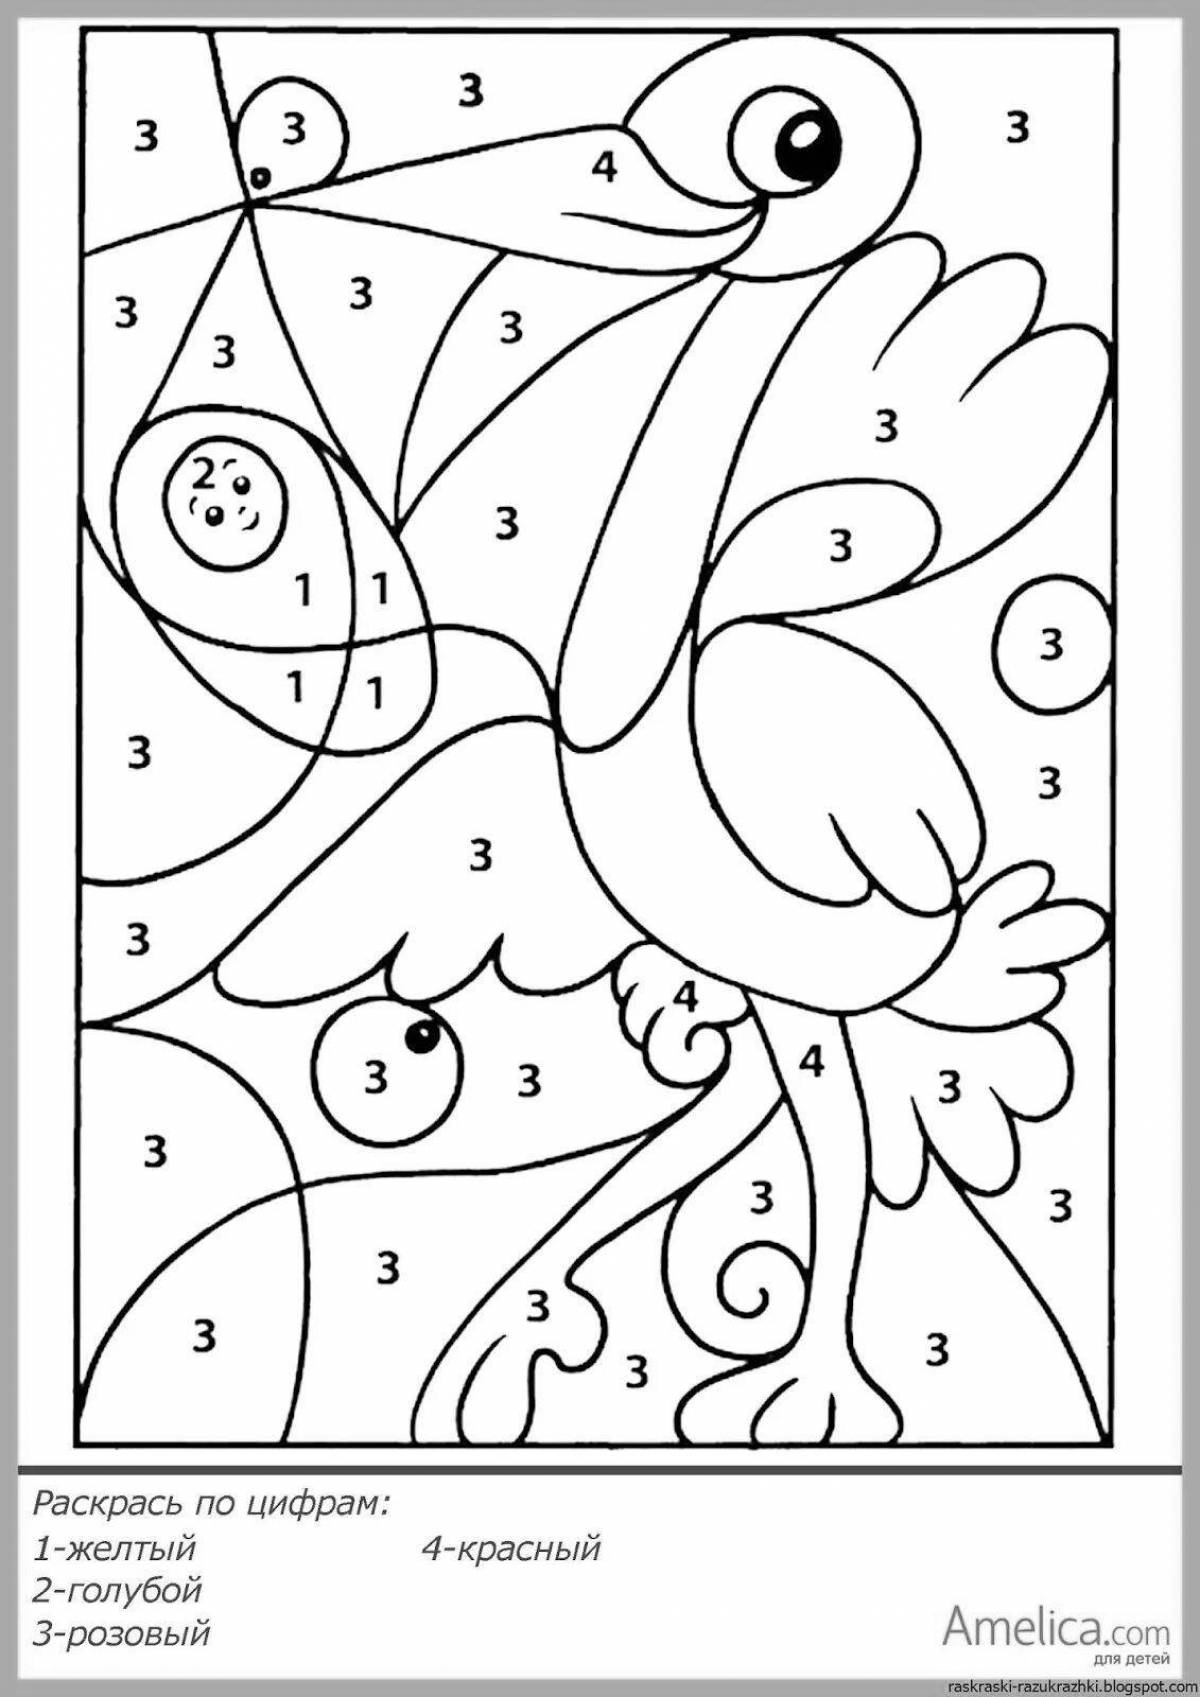 Consolation 6 years in numbers coloring page